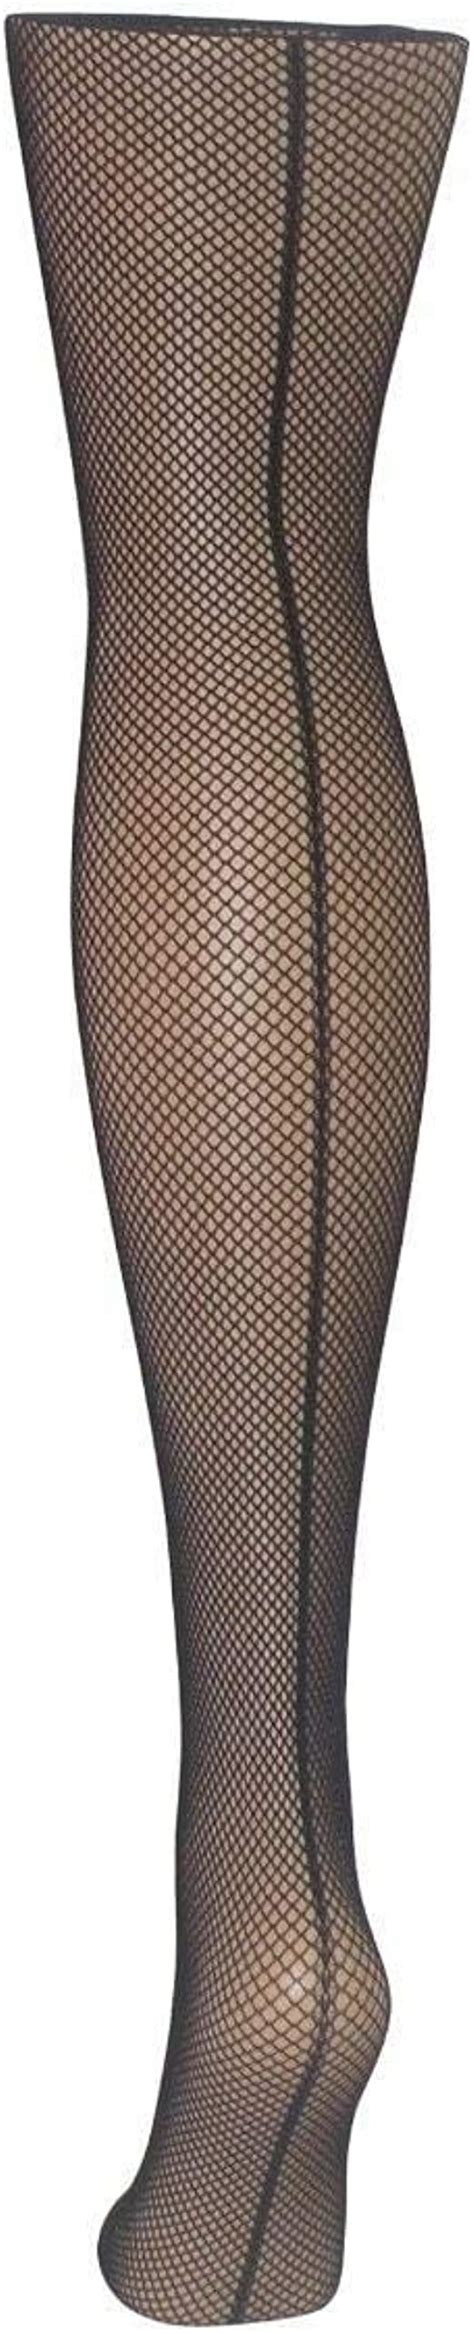 Mytoptrendz Fishnet Lace Top Stockings With Back Seam Seamer Thigh